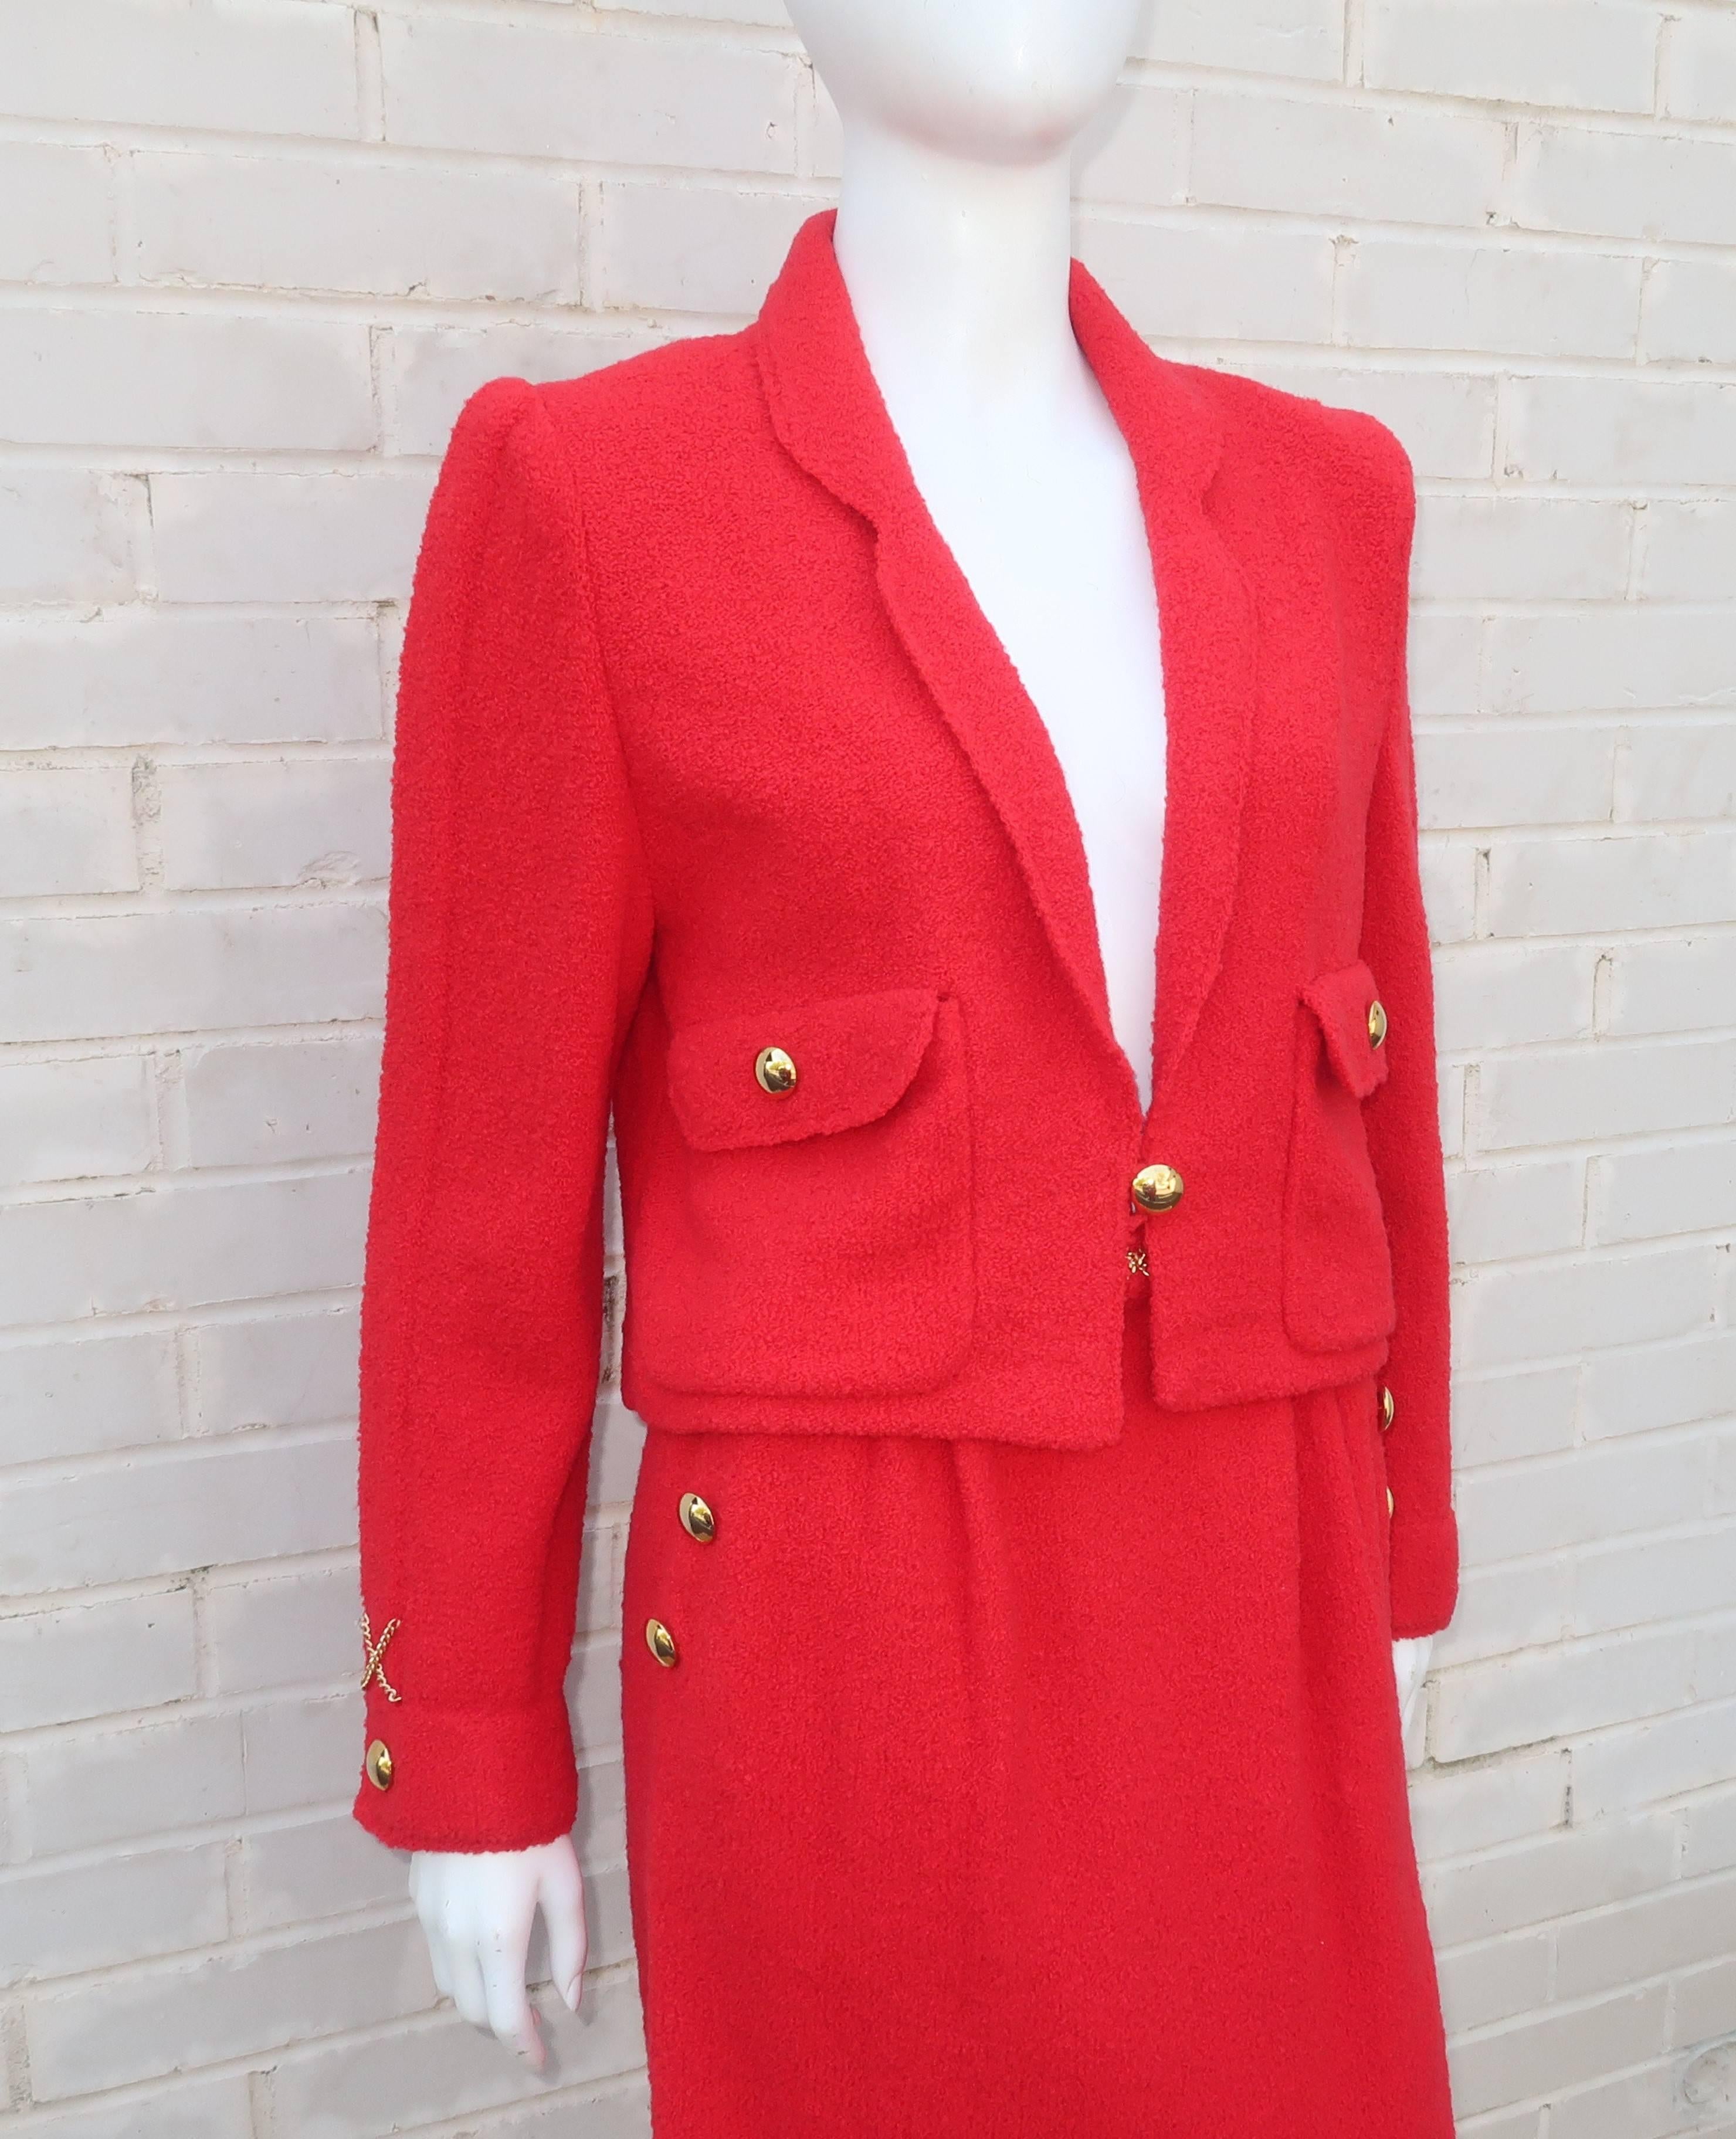 Women's Adolfo Red Boucle Knit Skirt Suit With Chain Details, 1980s